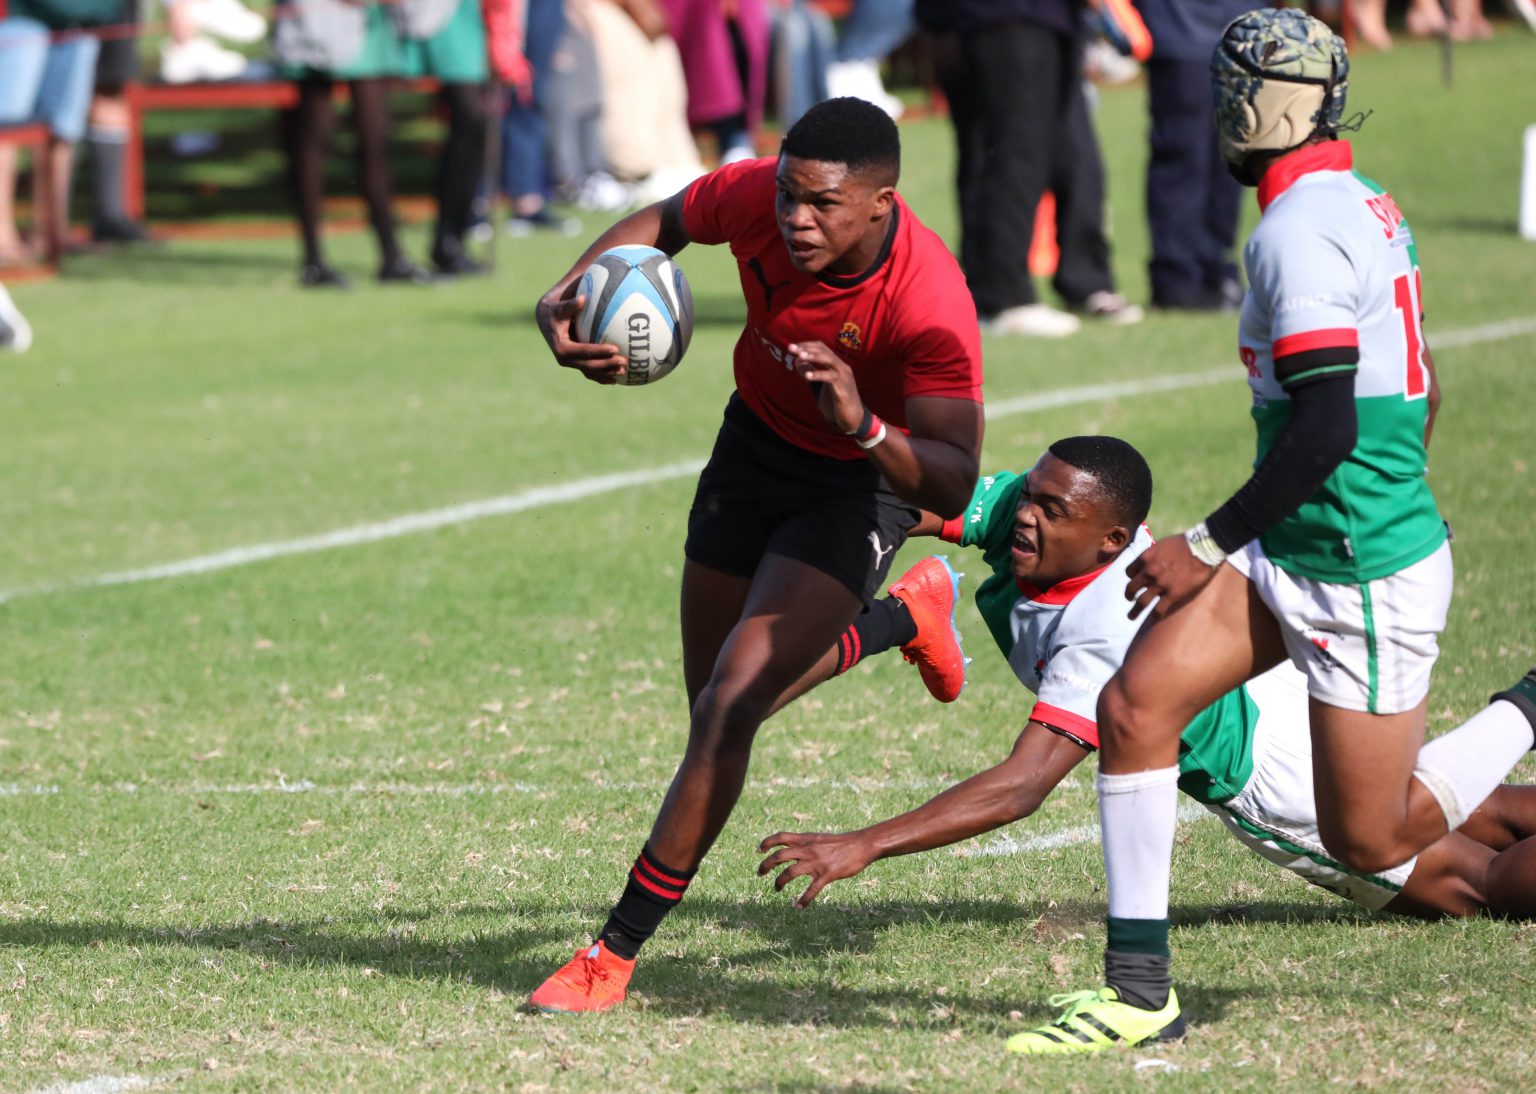 Likhona Kepe avoids a tackle in front of the Kingswood College try line, 1st XV against Brandwag. Kingswood went on to win 33-0. Photo: Jackie Clausen